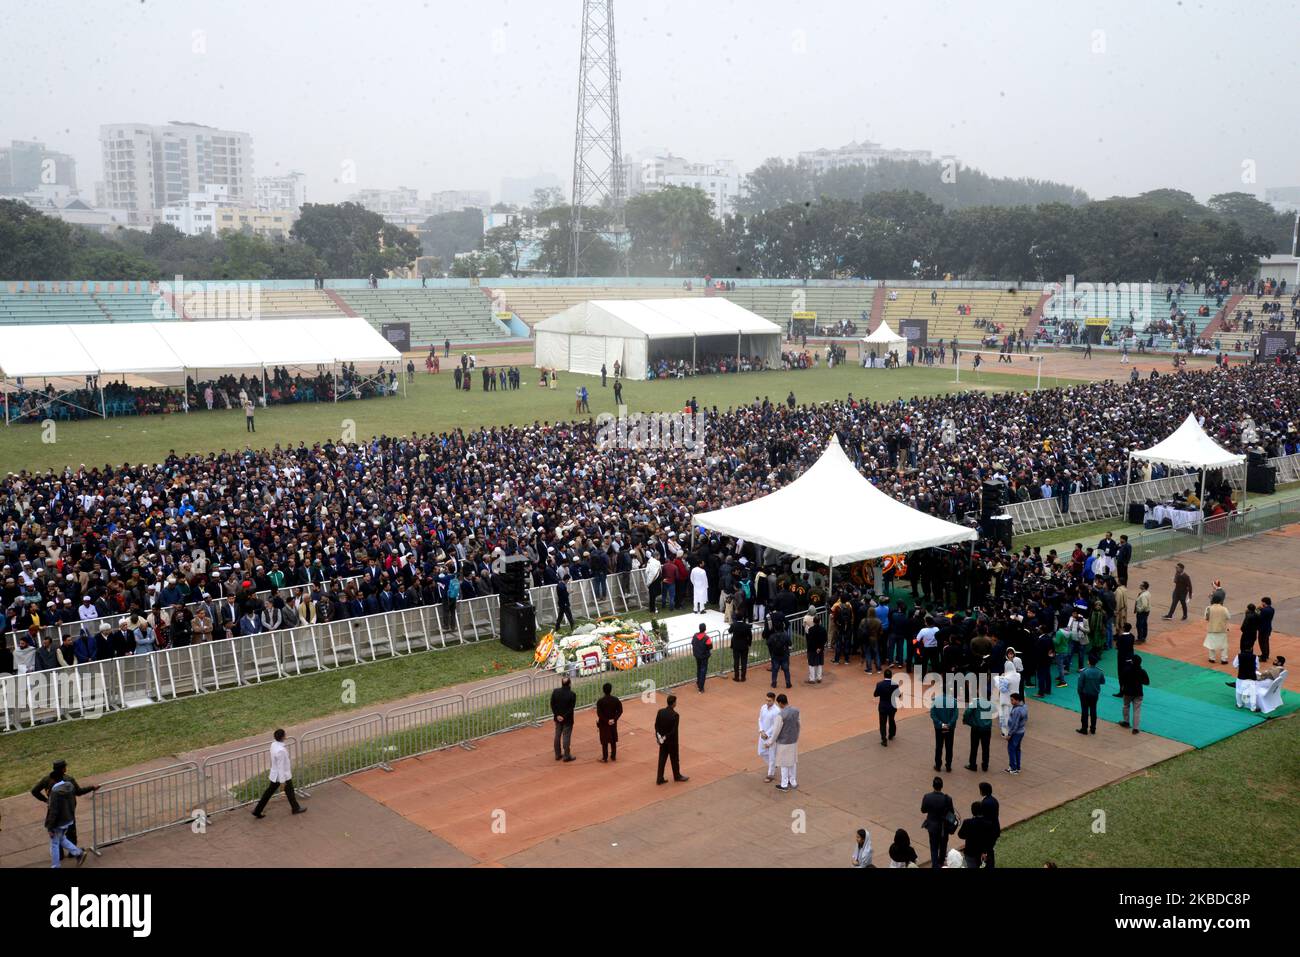 People offer funeral prayers for Sir Fazle Hasan Abed, the founder of the Bangladesh Rural Advancement Committee (BRAC), in Dhaka, Bangladesh, on December 22, 2019. Thousands gathered in Bangladesh's capital on December 22 to attend the funeral of Sir Fazle Hasan Abed, founder of BRAC, one of the world's largest NGOs, to show their final respect. (Photo by Mamunur Rashid/NurPhoto) Stock Photo